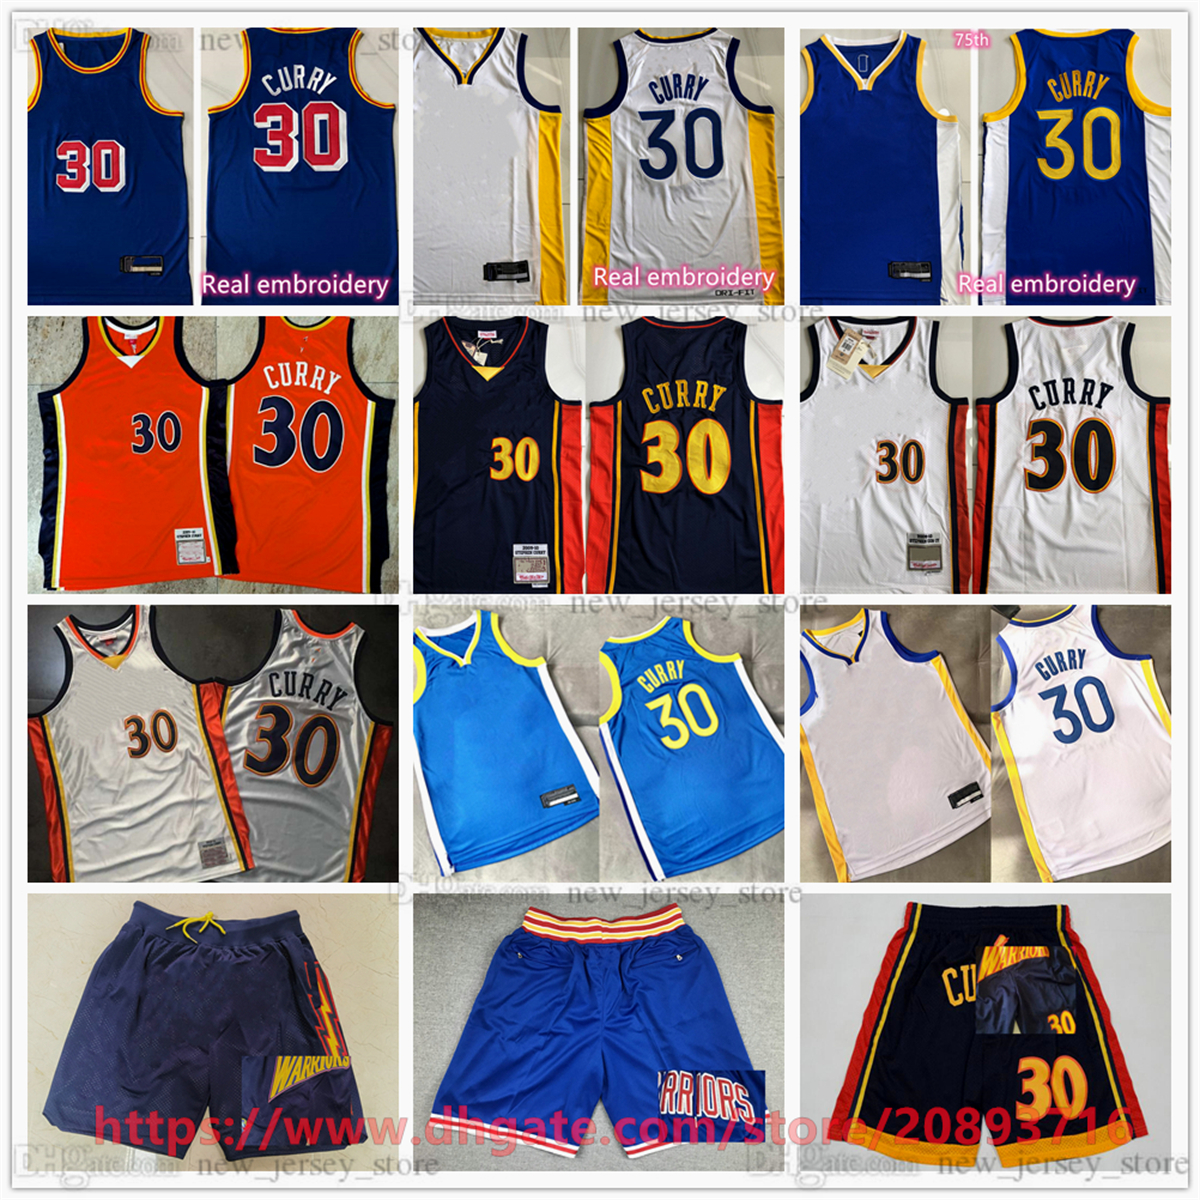 Mitchell and Ness Authentic Embroidery Basketball 30 StephenCurry Jerseys Retro Blue Orange White 2009-10 Breathable Sport Real Stitched Quality Jersey Shorts